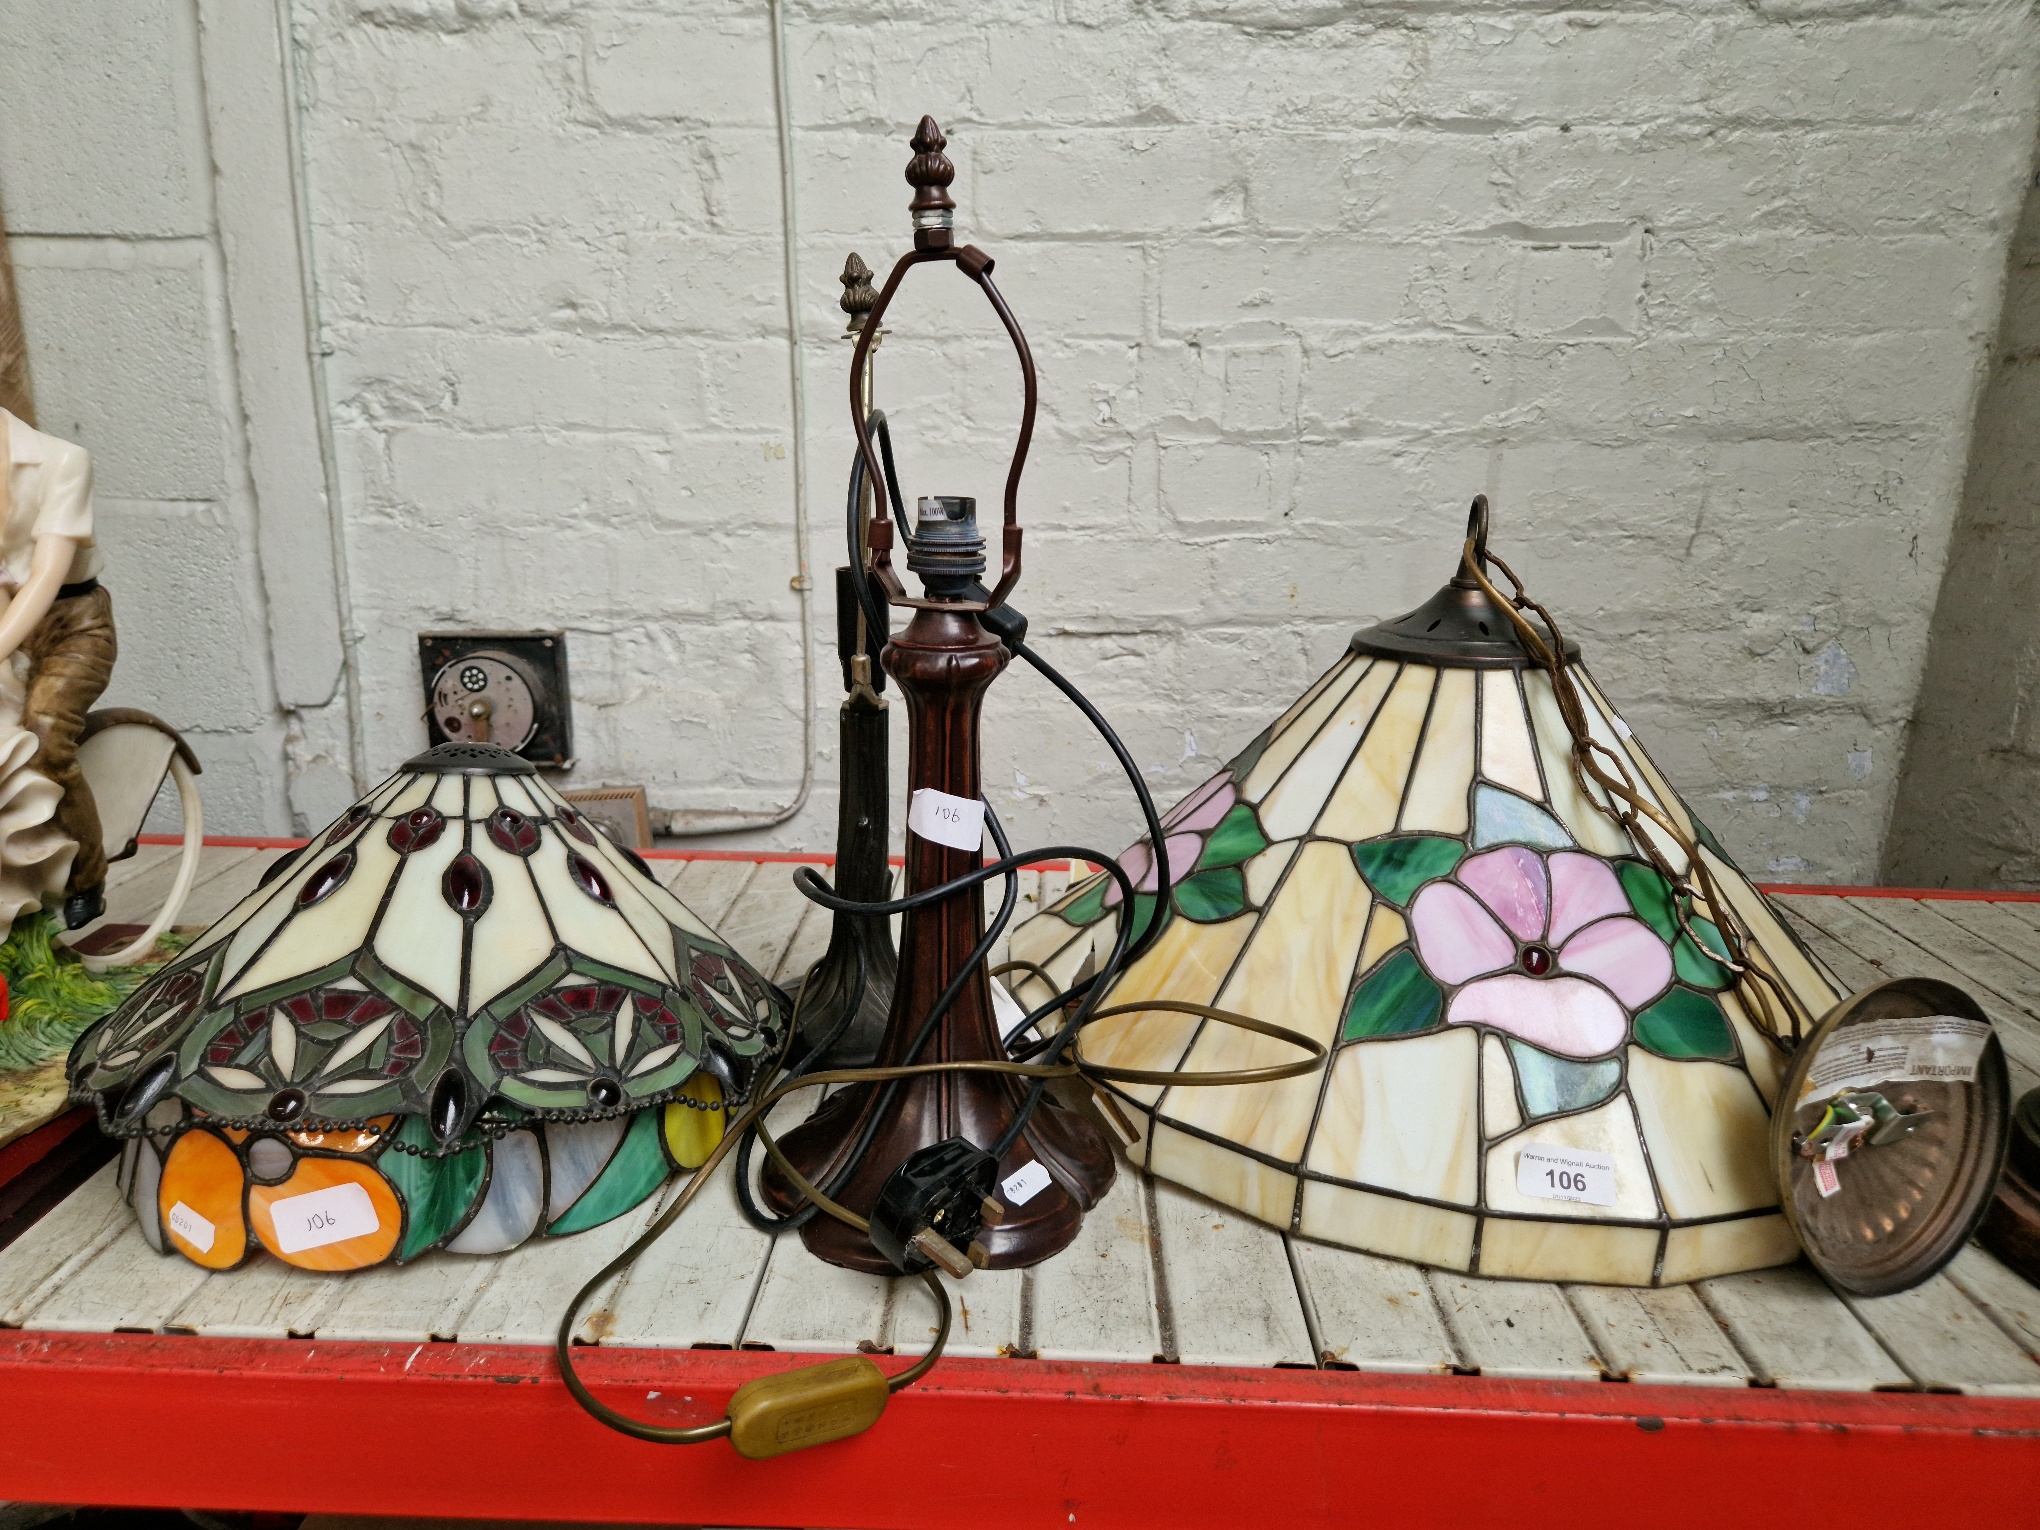 Three Tiffany style lamps with shades and one ceiling light fitting which has some damage to the